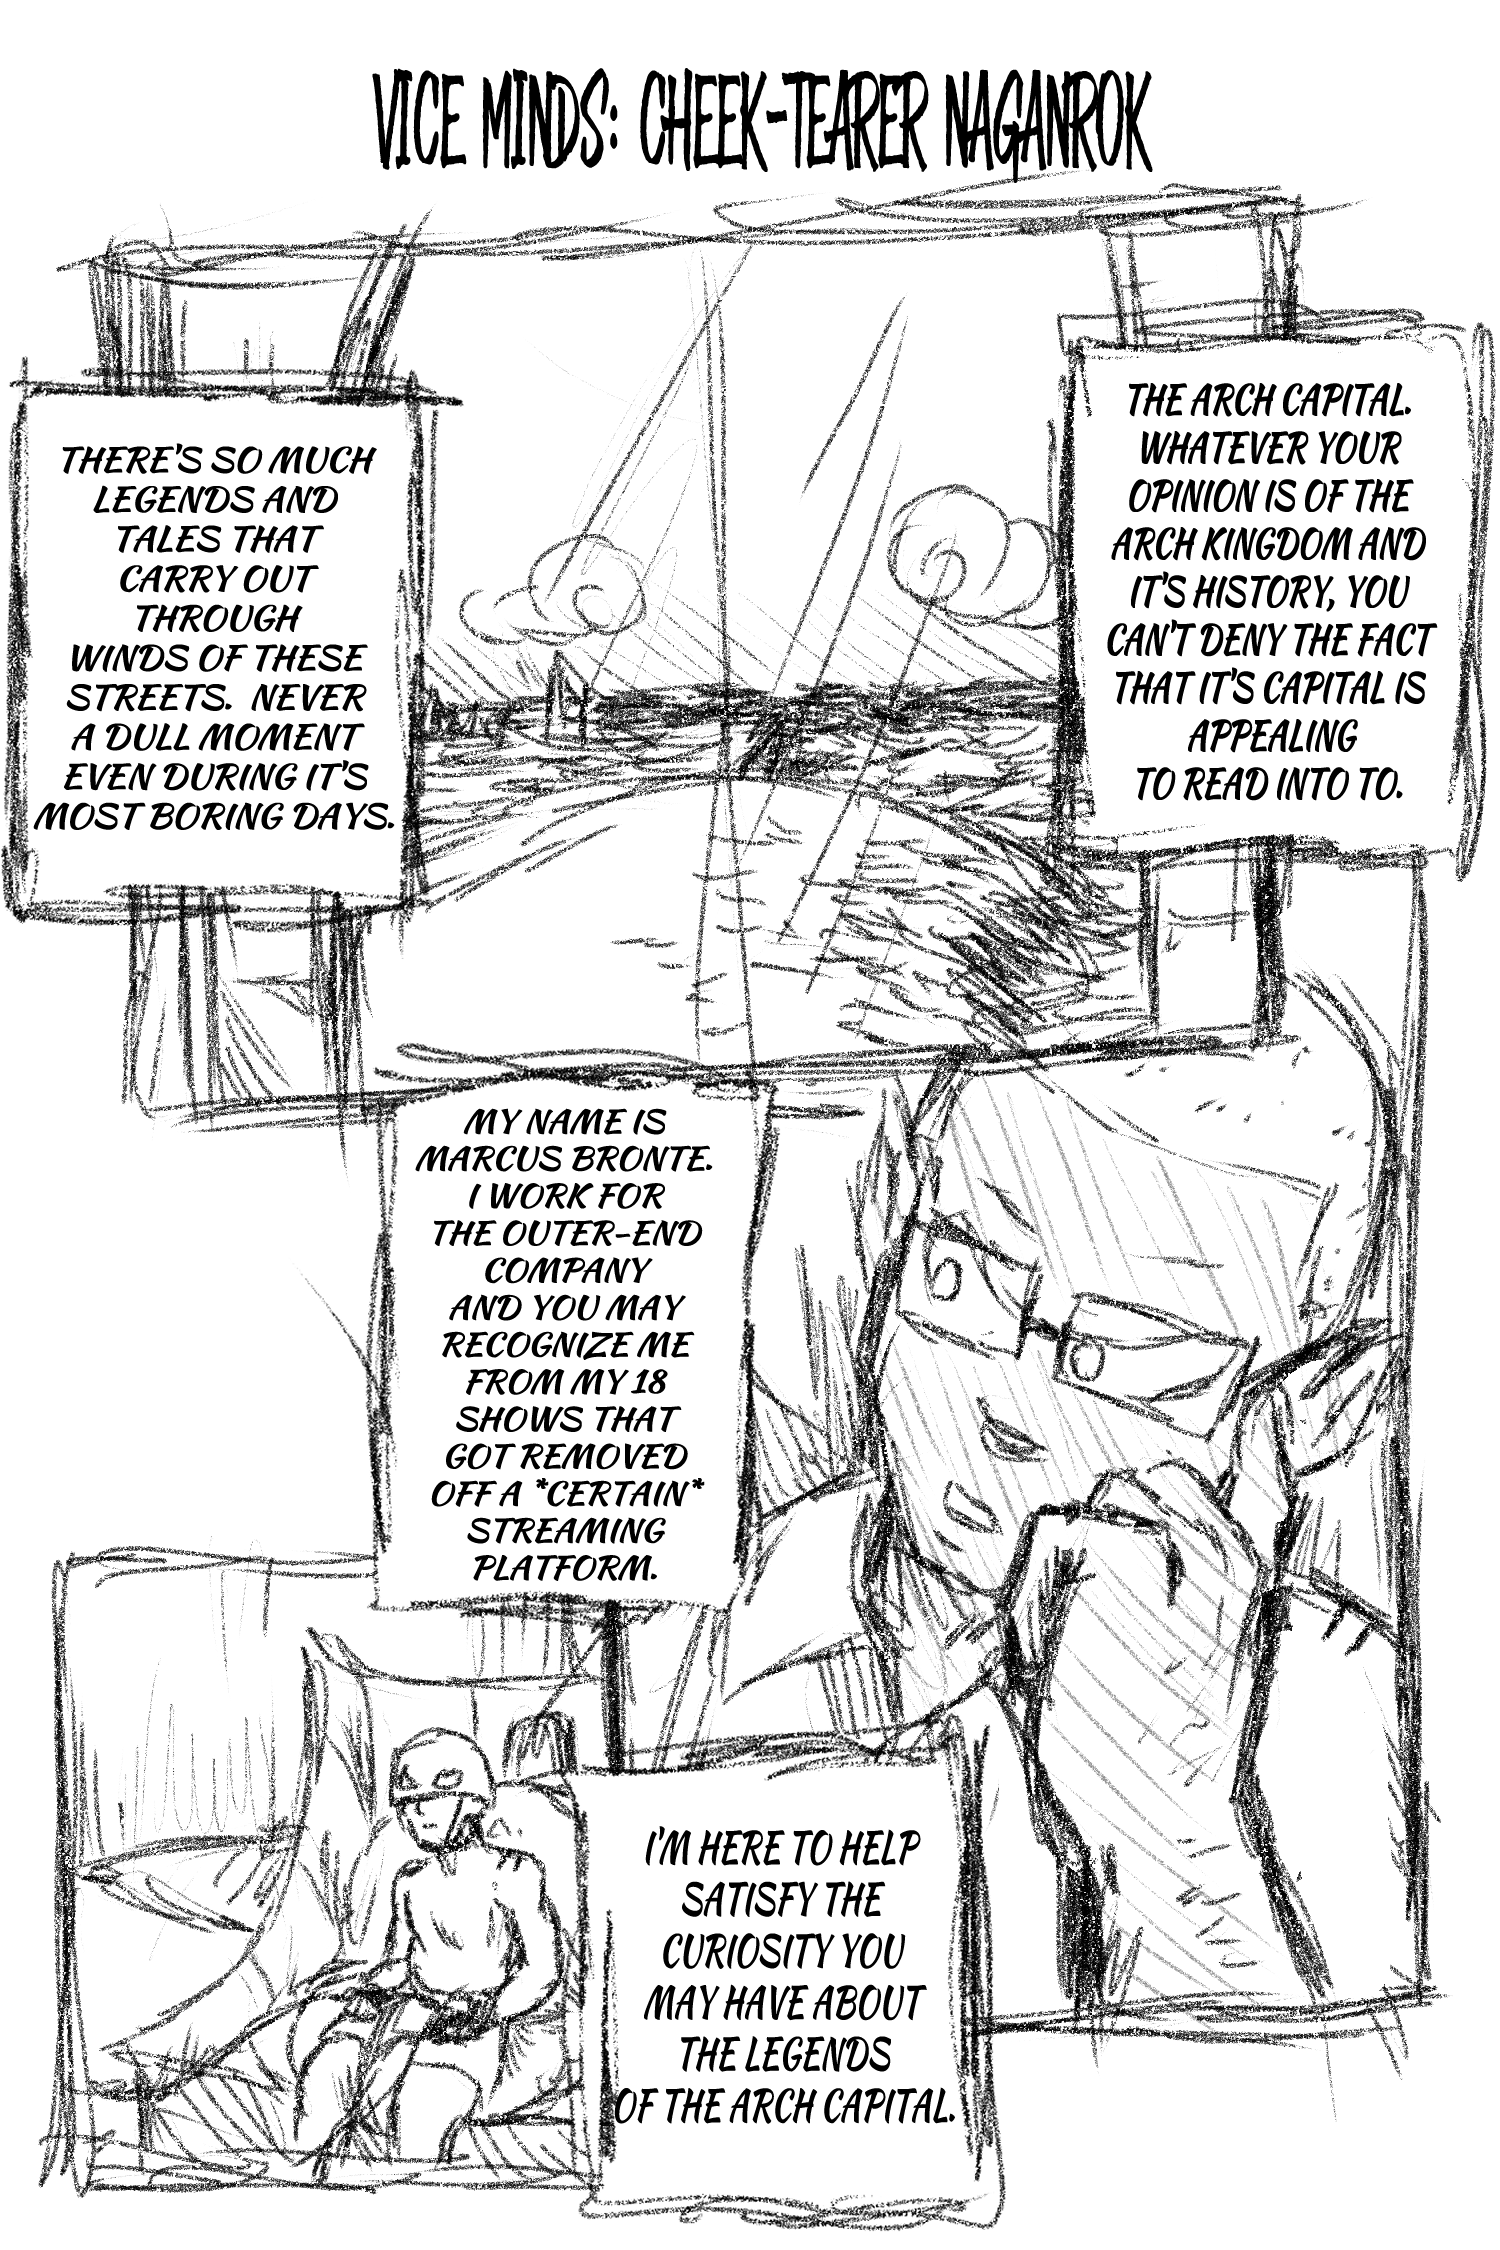 Misenchanted - Page 1